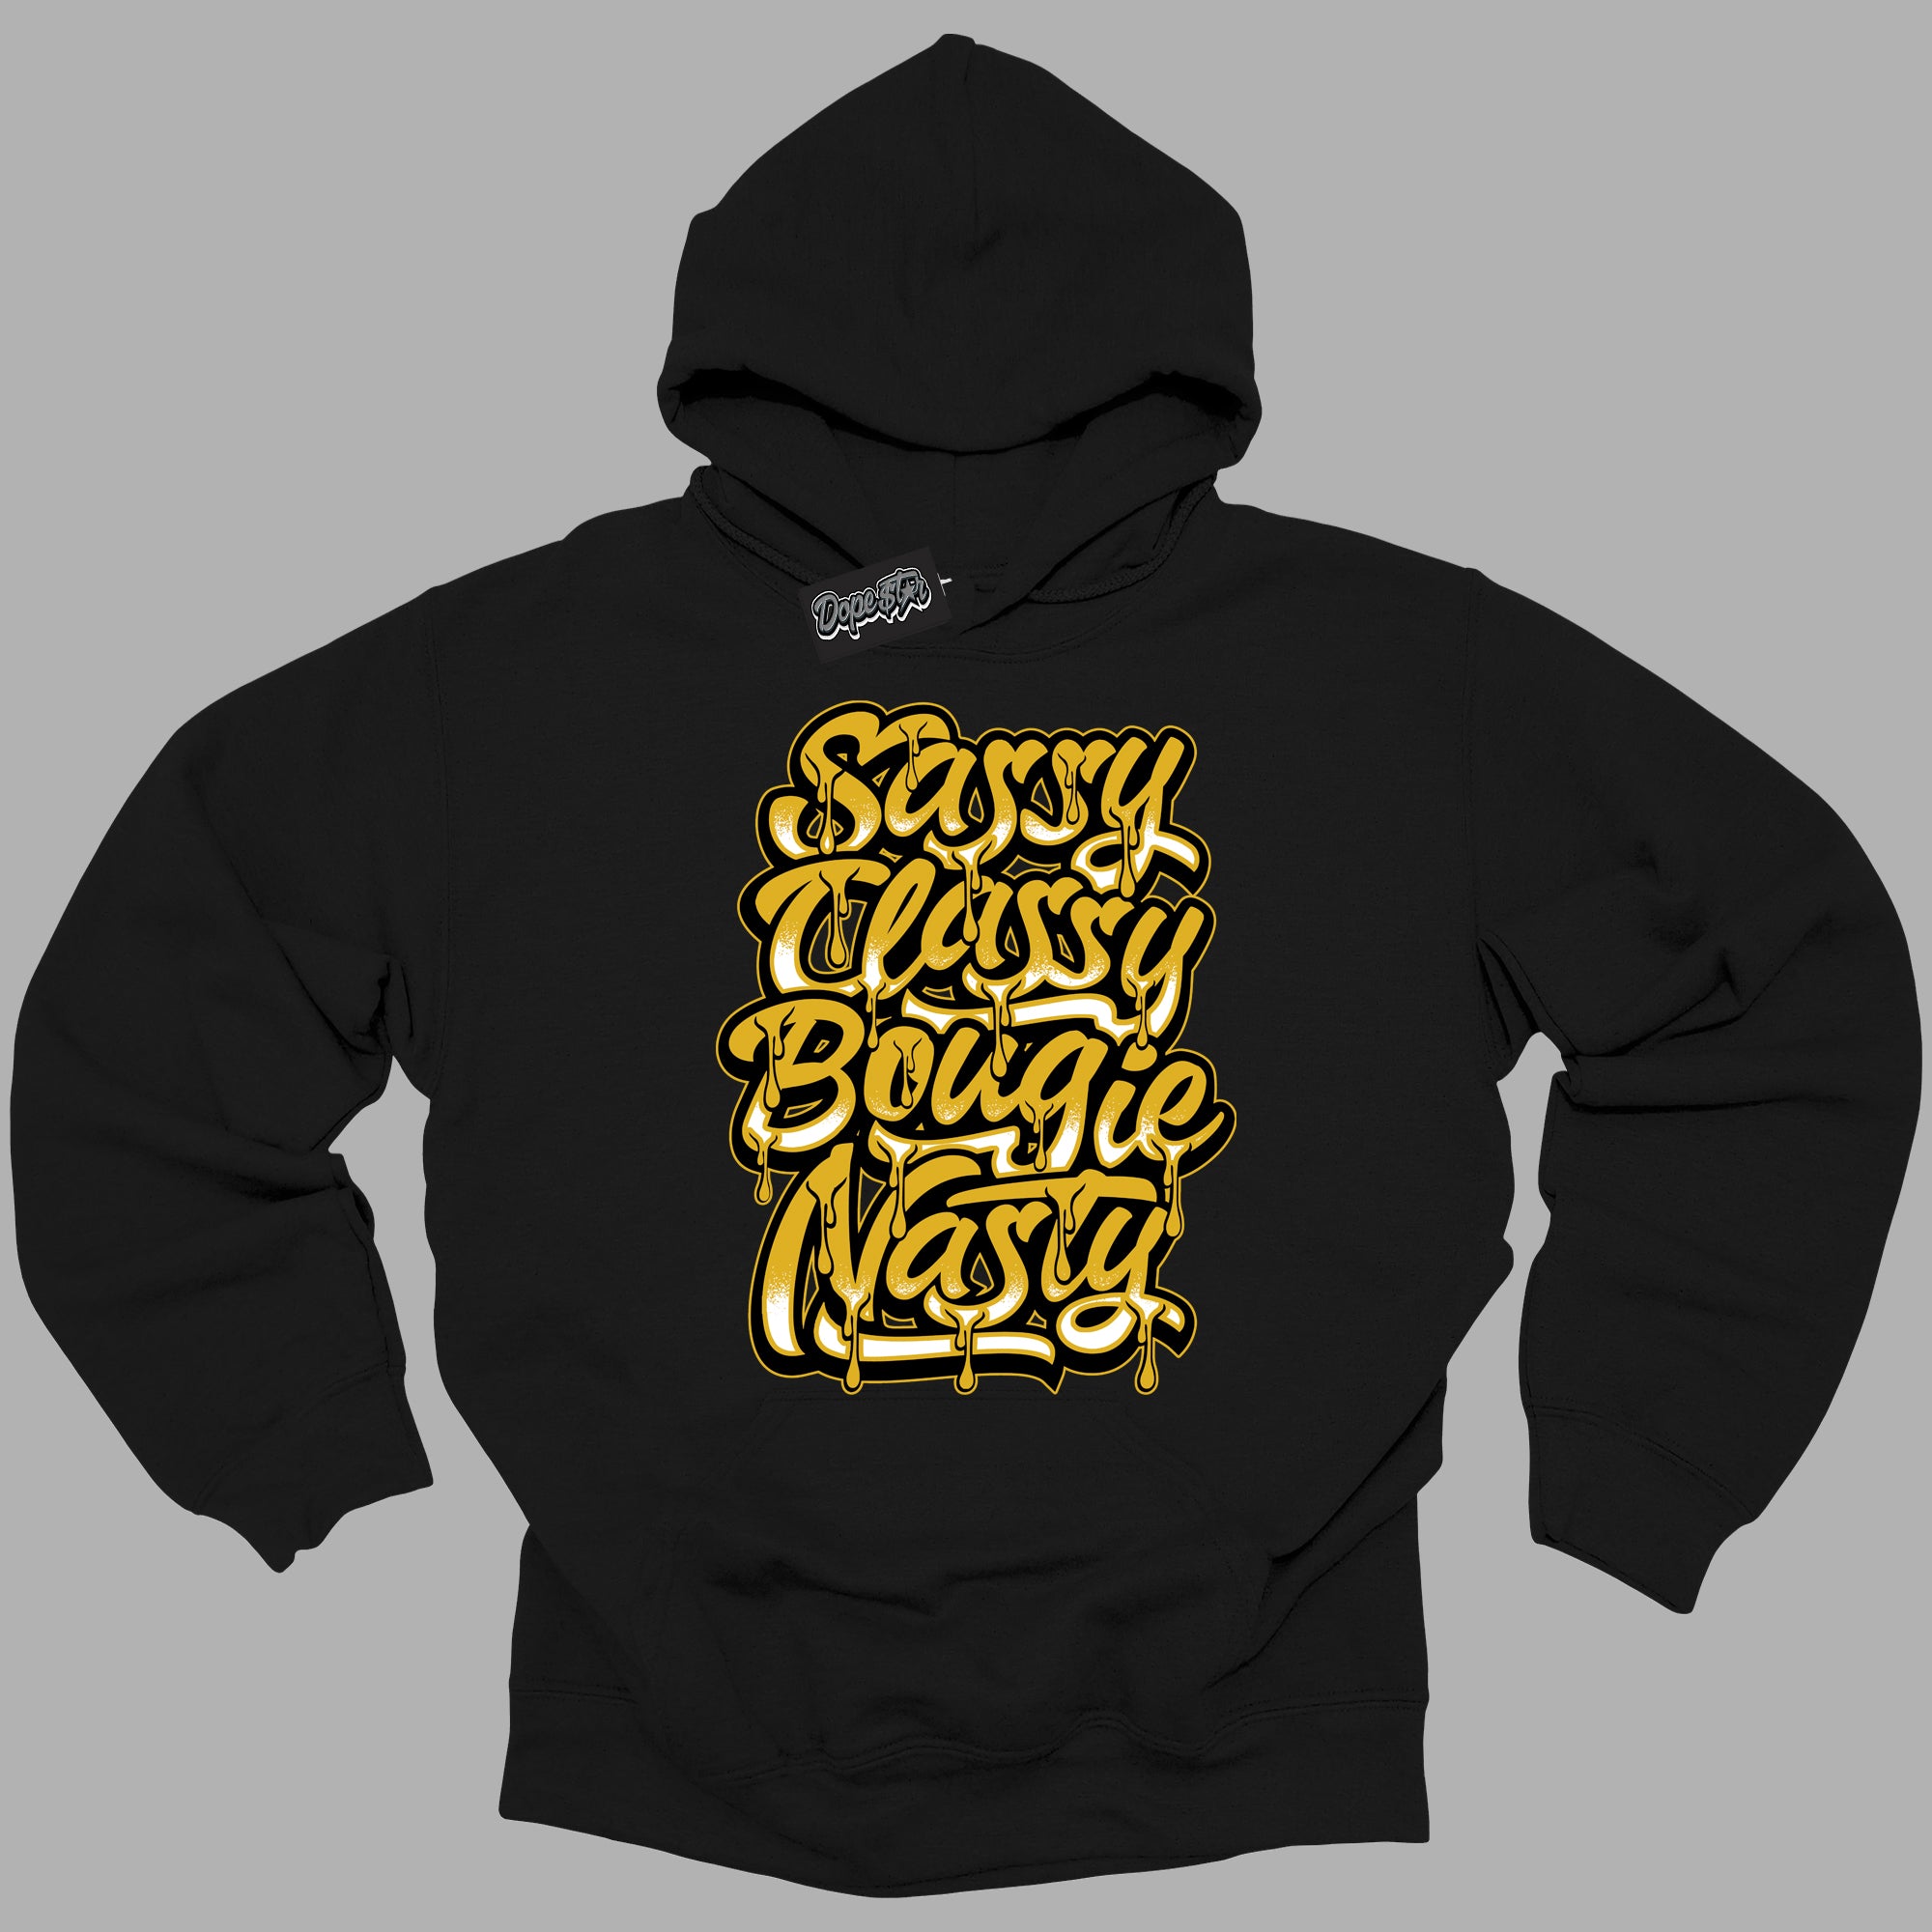 Cool Black Hoodie with “ Sassy Classy ”  design that Perfectly Matches Yellow Ochre 6s Sneakers.